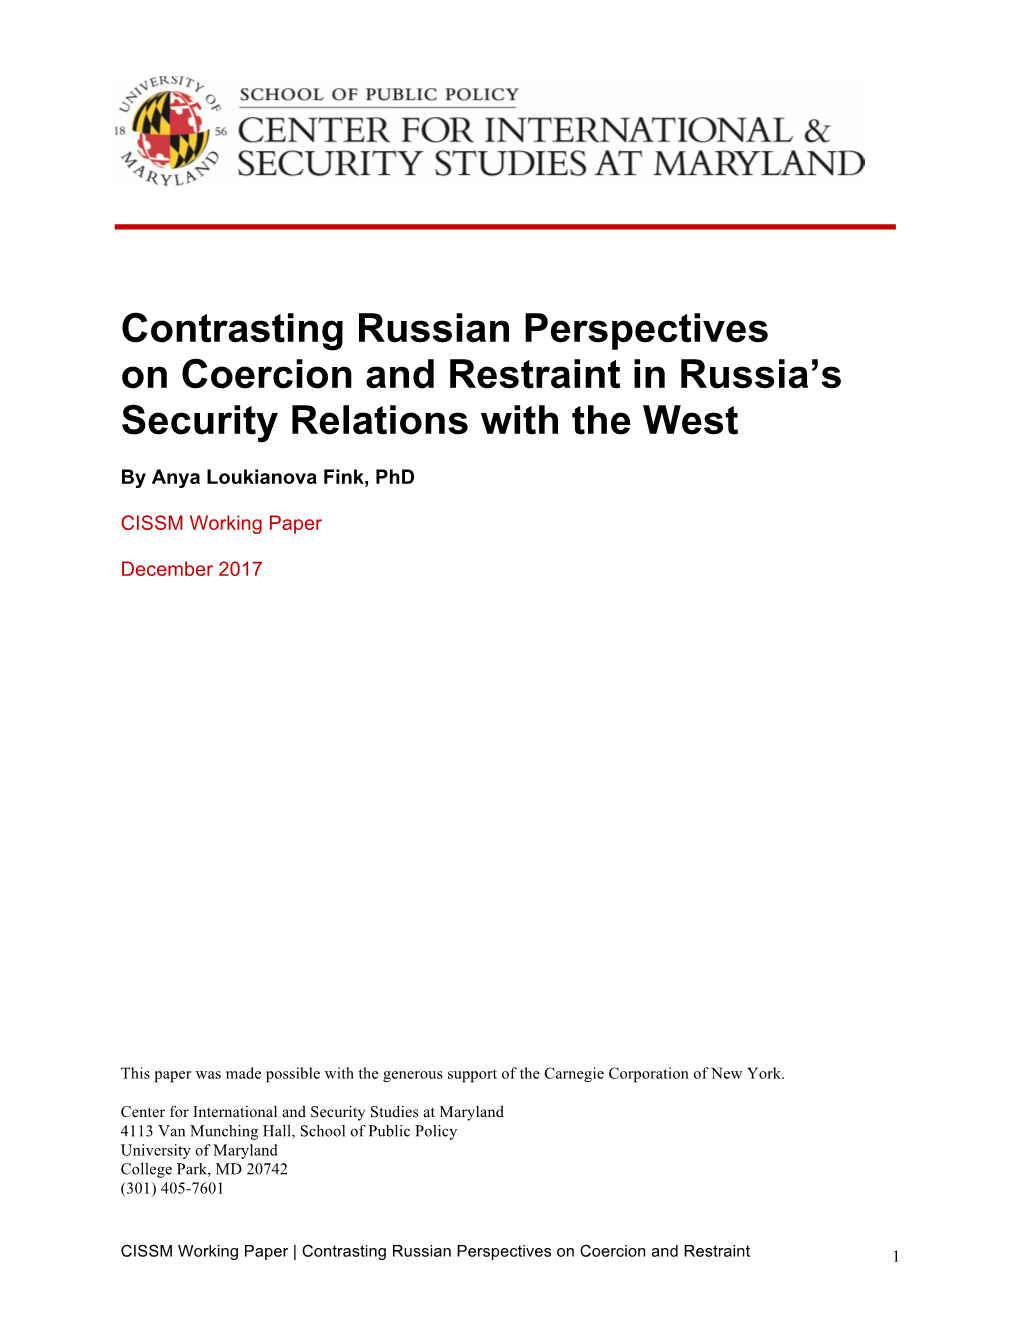 Contrasting Russian Perspectives on Coercion and Restraint 121517